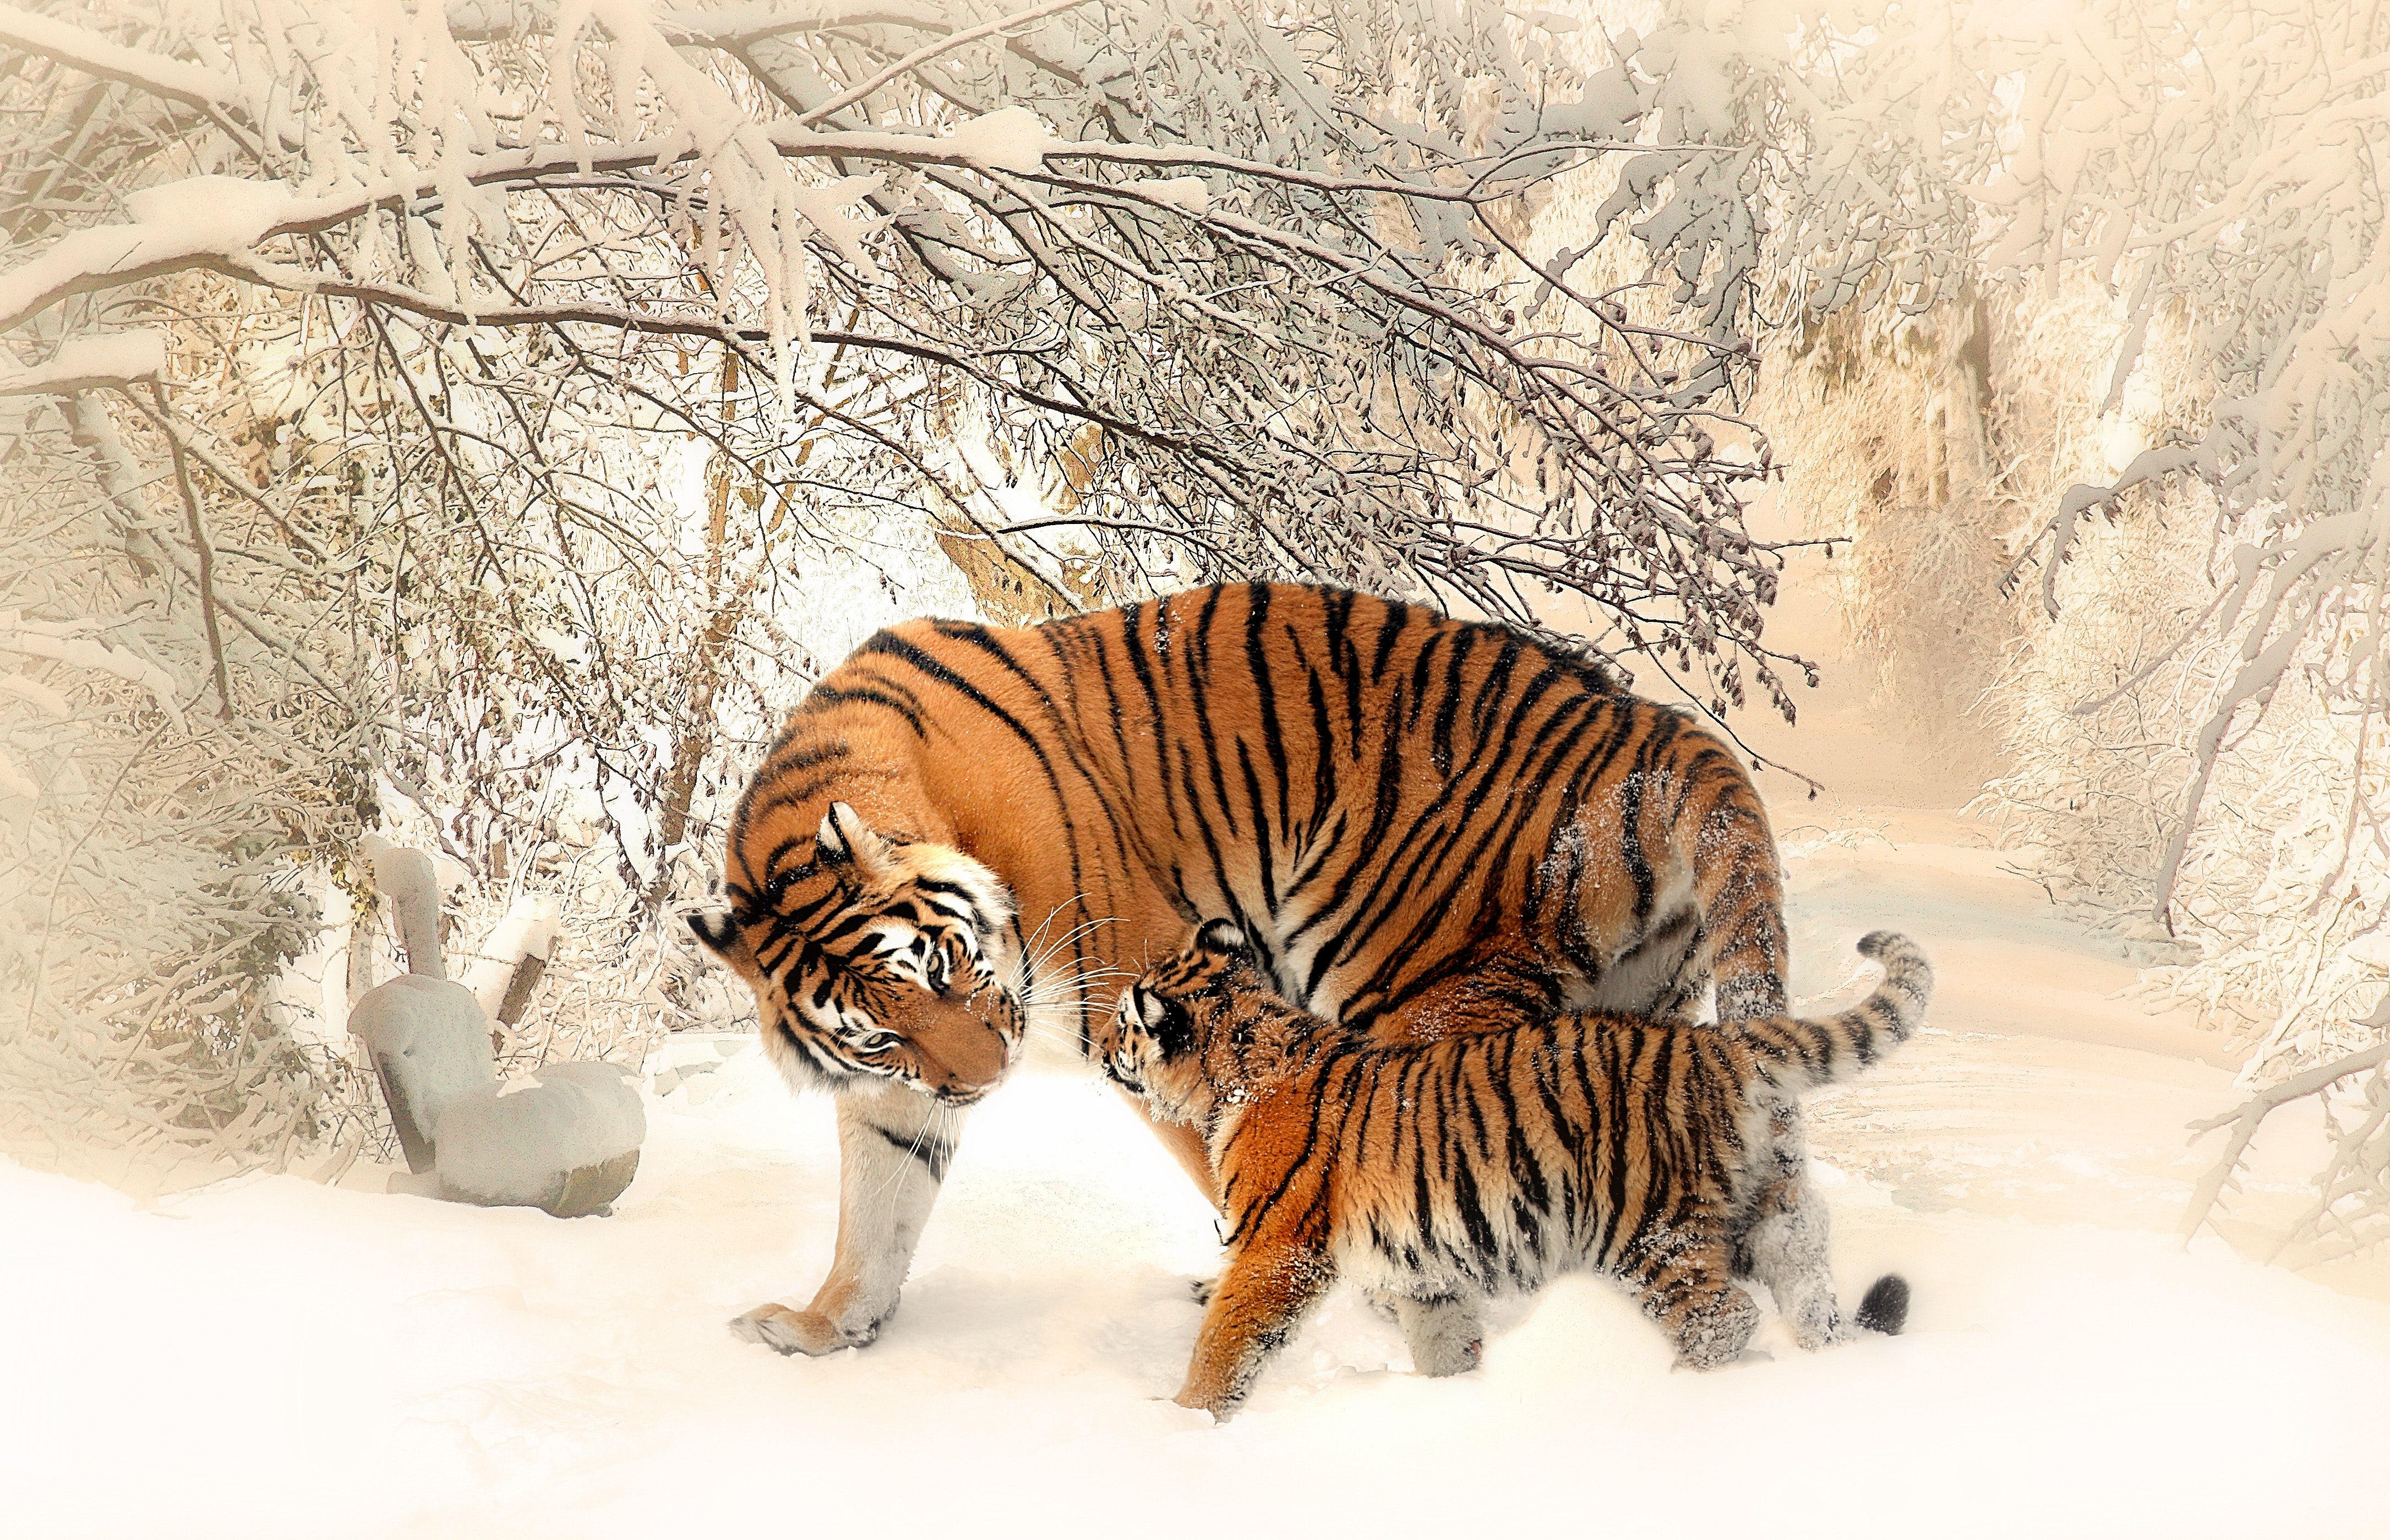 Adult and cub tiger on snowfield near bare trees photo